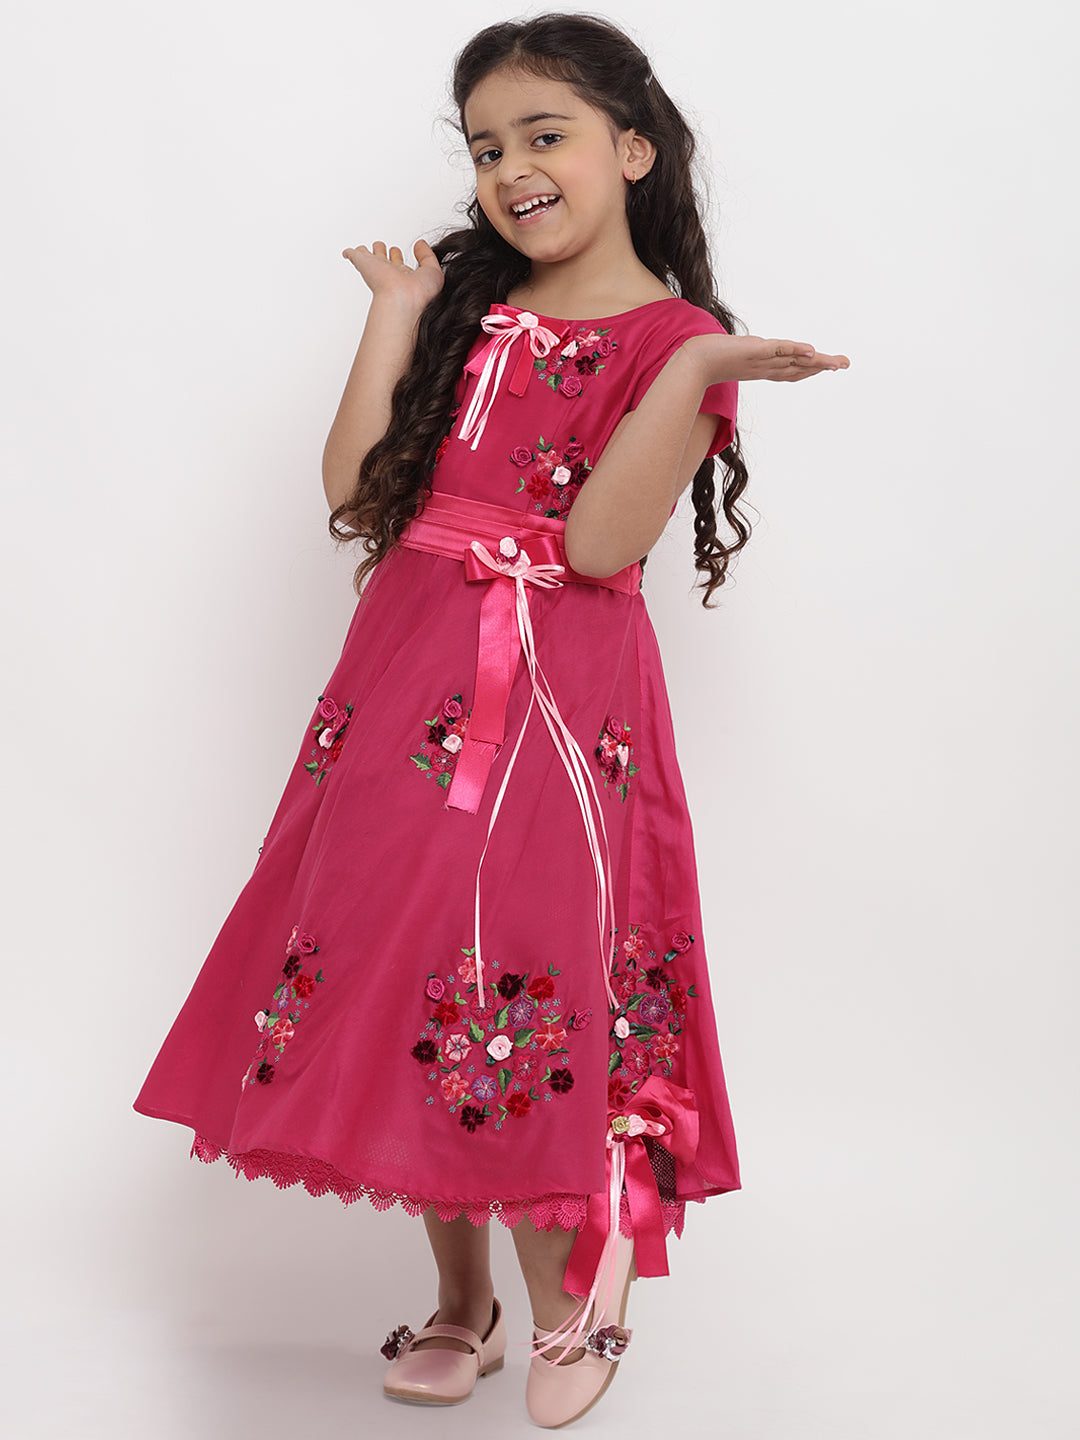 Bitiya by Bhama Girls Pink Floral Embroidered Fit and Flare Dress ...